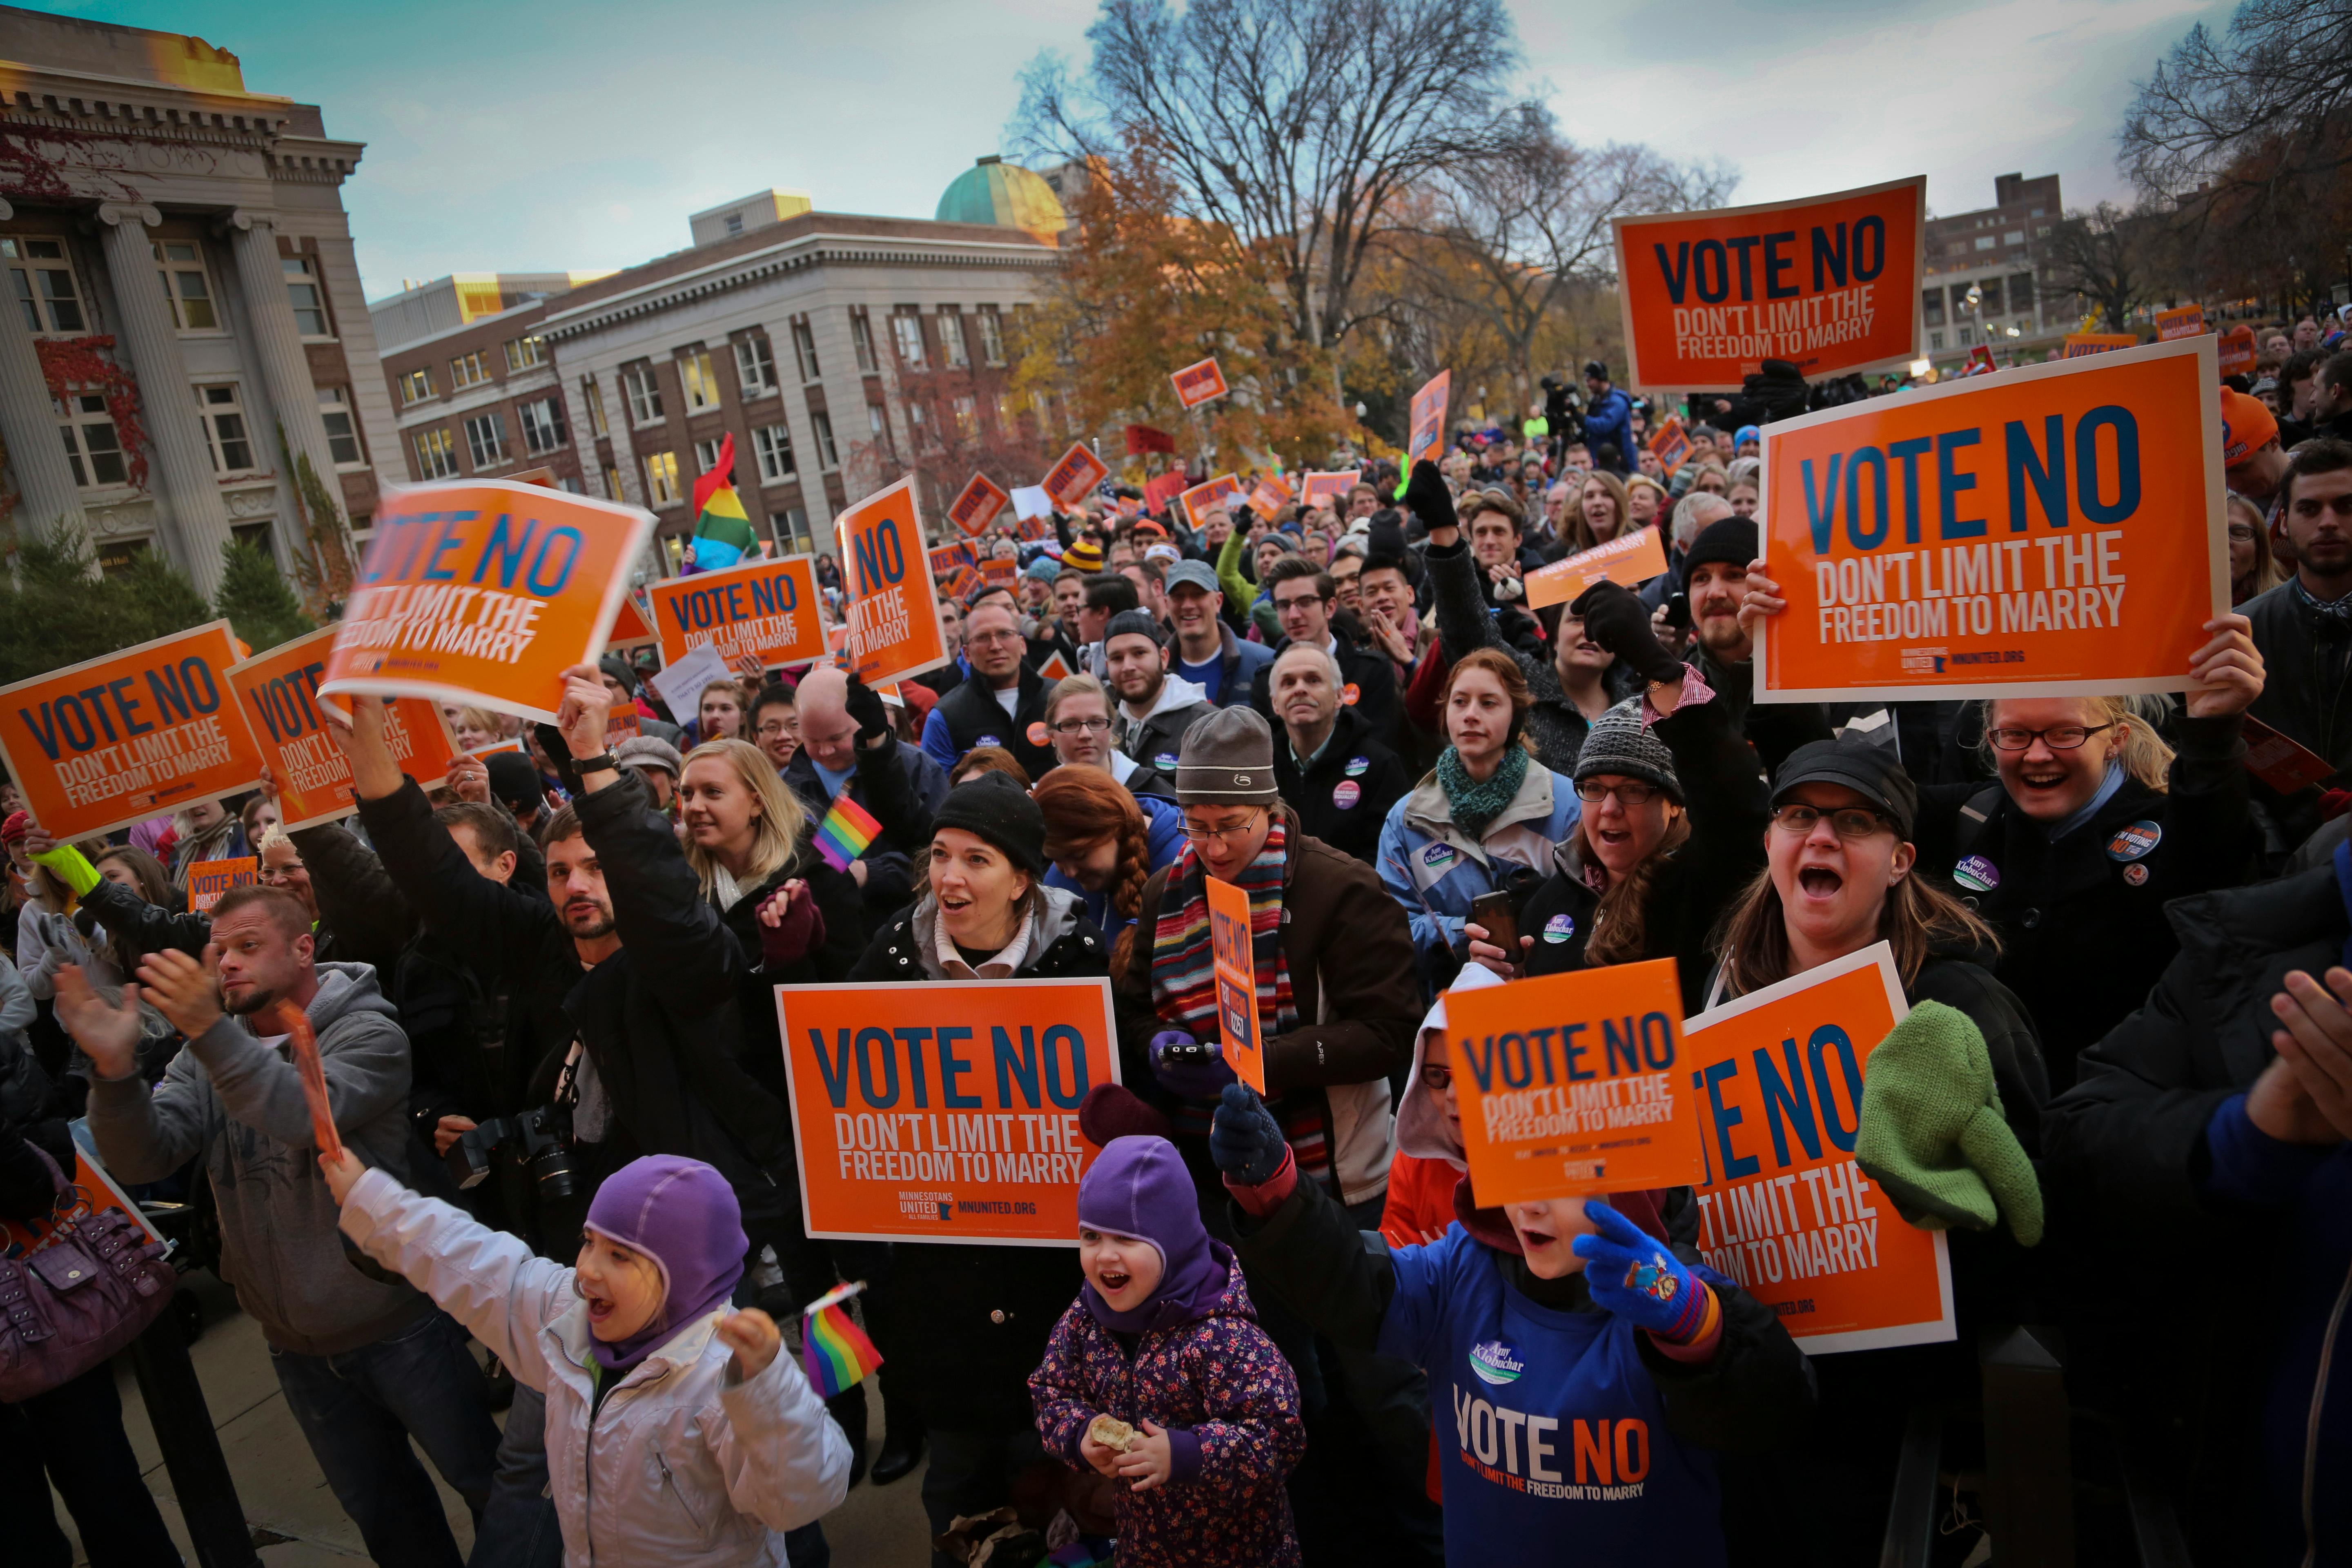 Hundreds of people rallied at the University of Minnesota against the proposed constitutional amendment banning same-sex marriage in 2012.